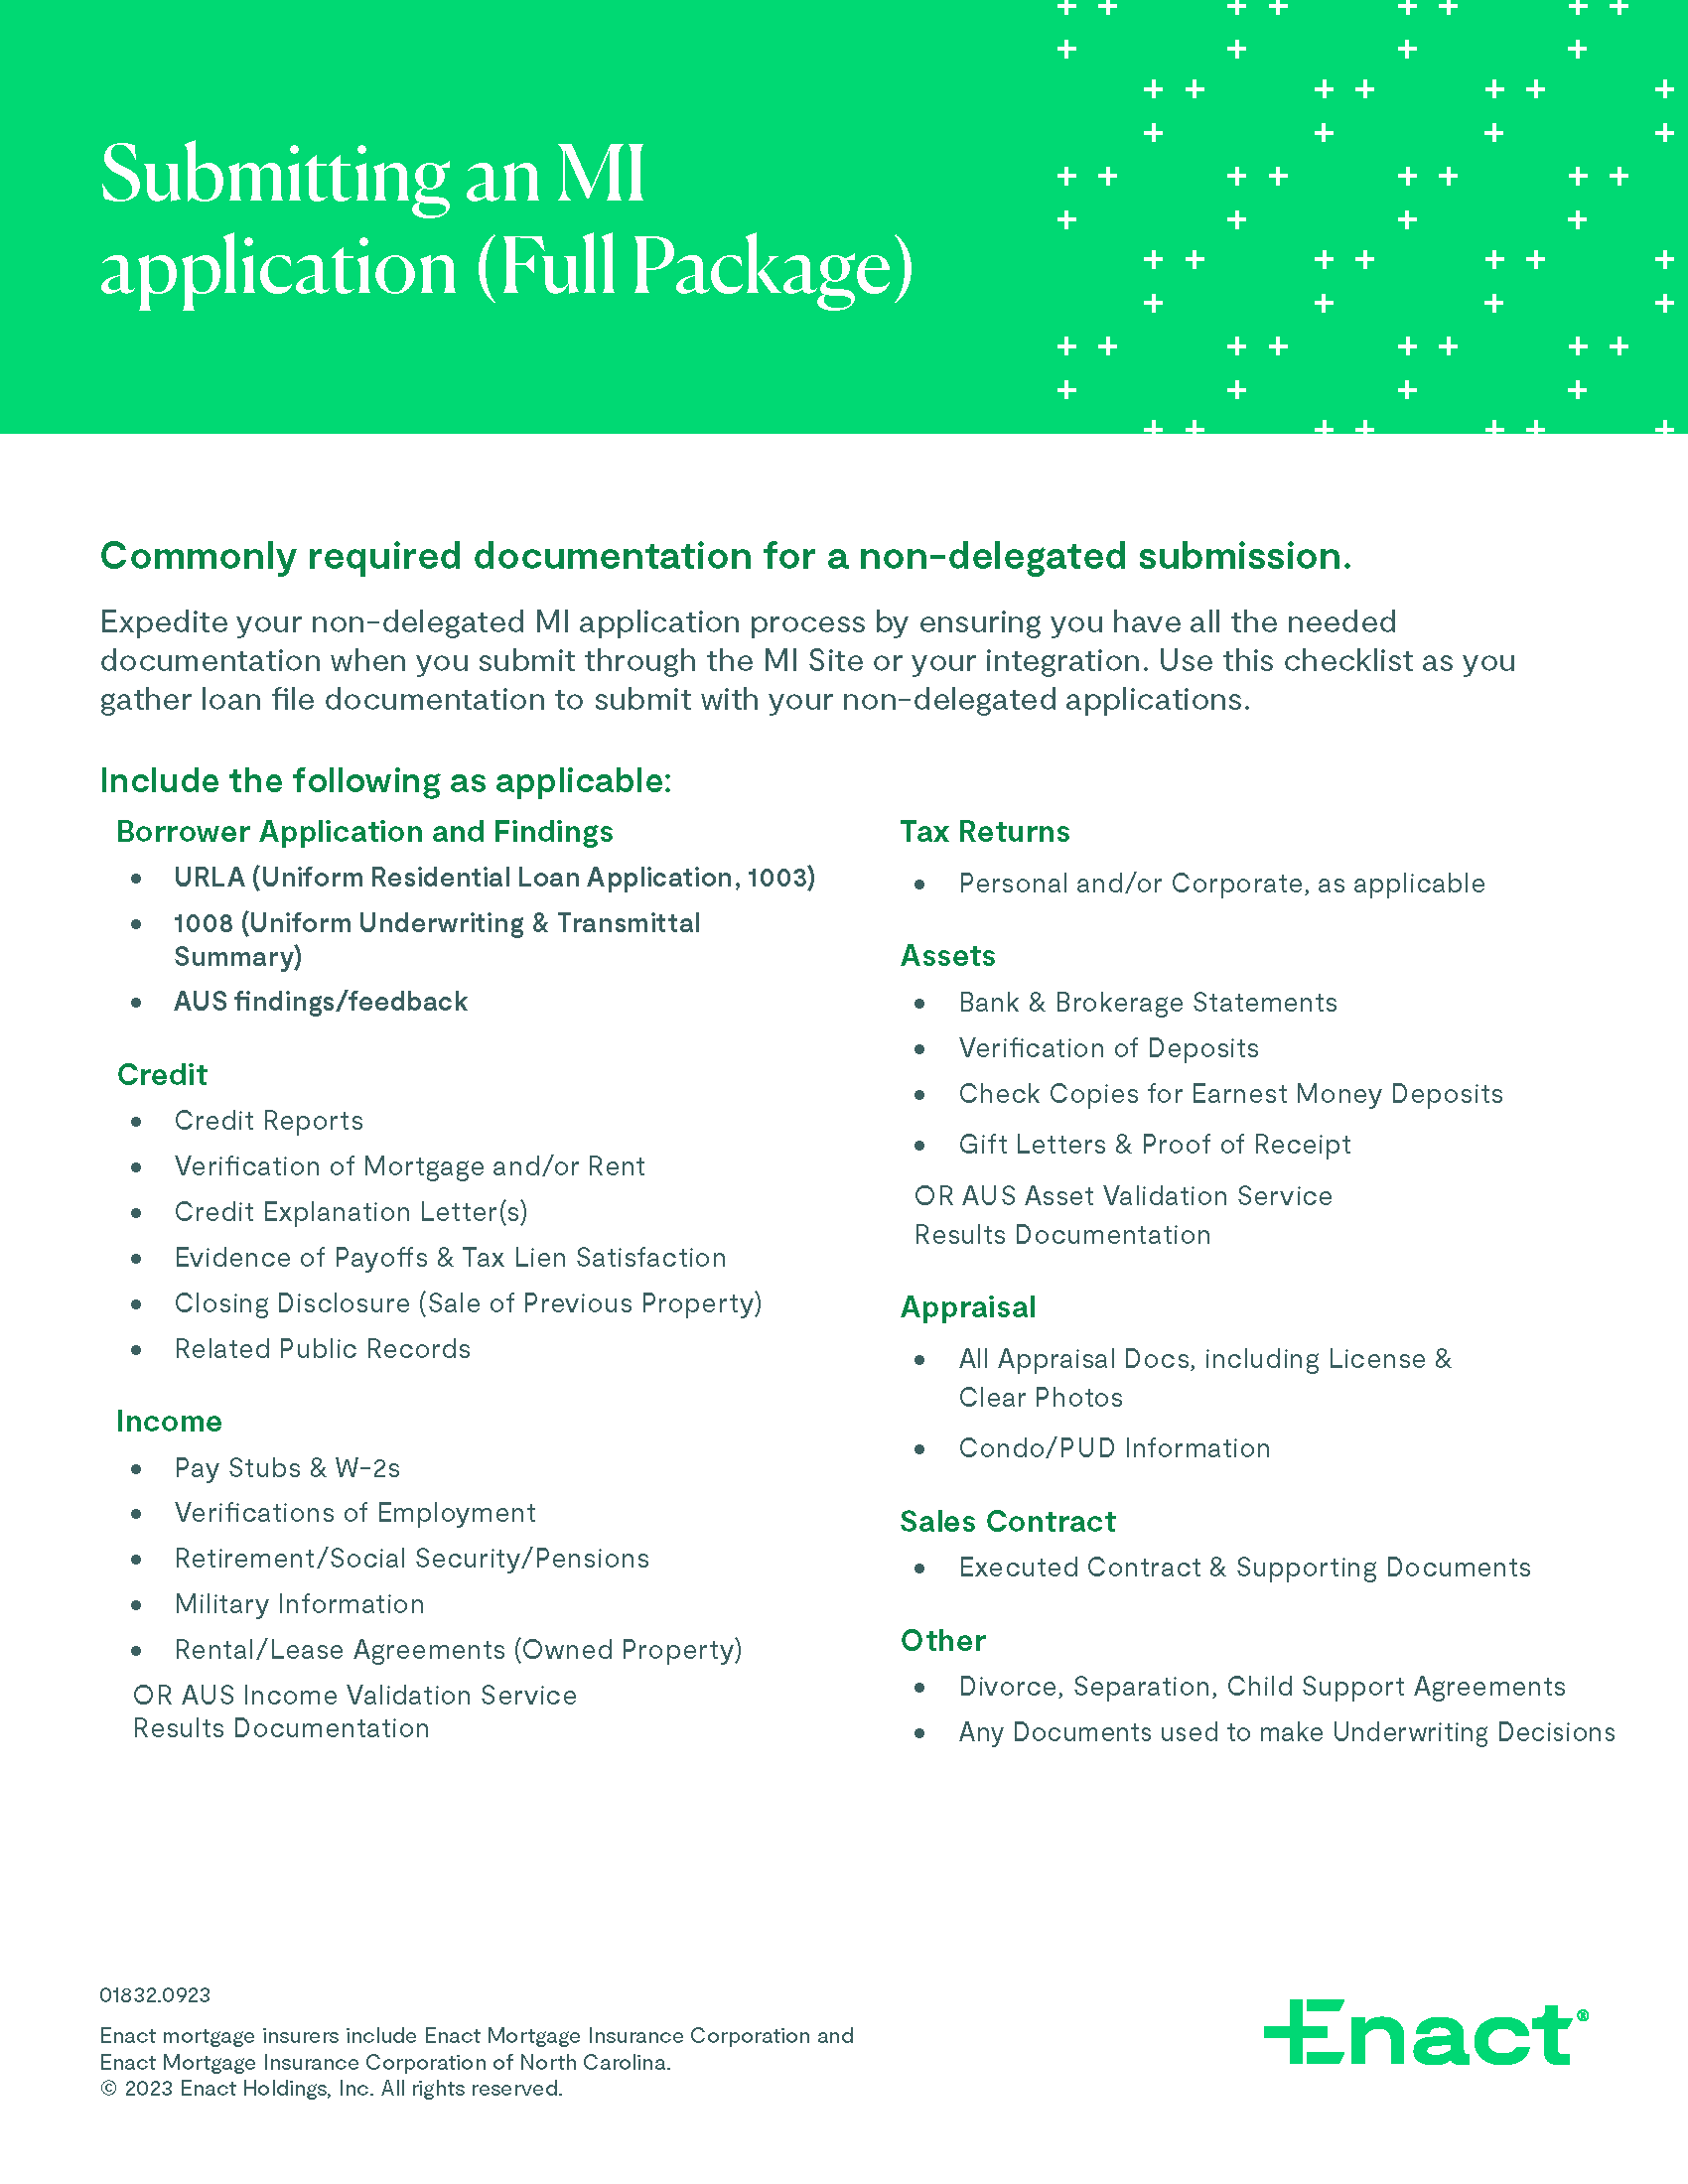 Full Package MI Application Required Document List